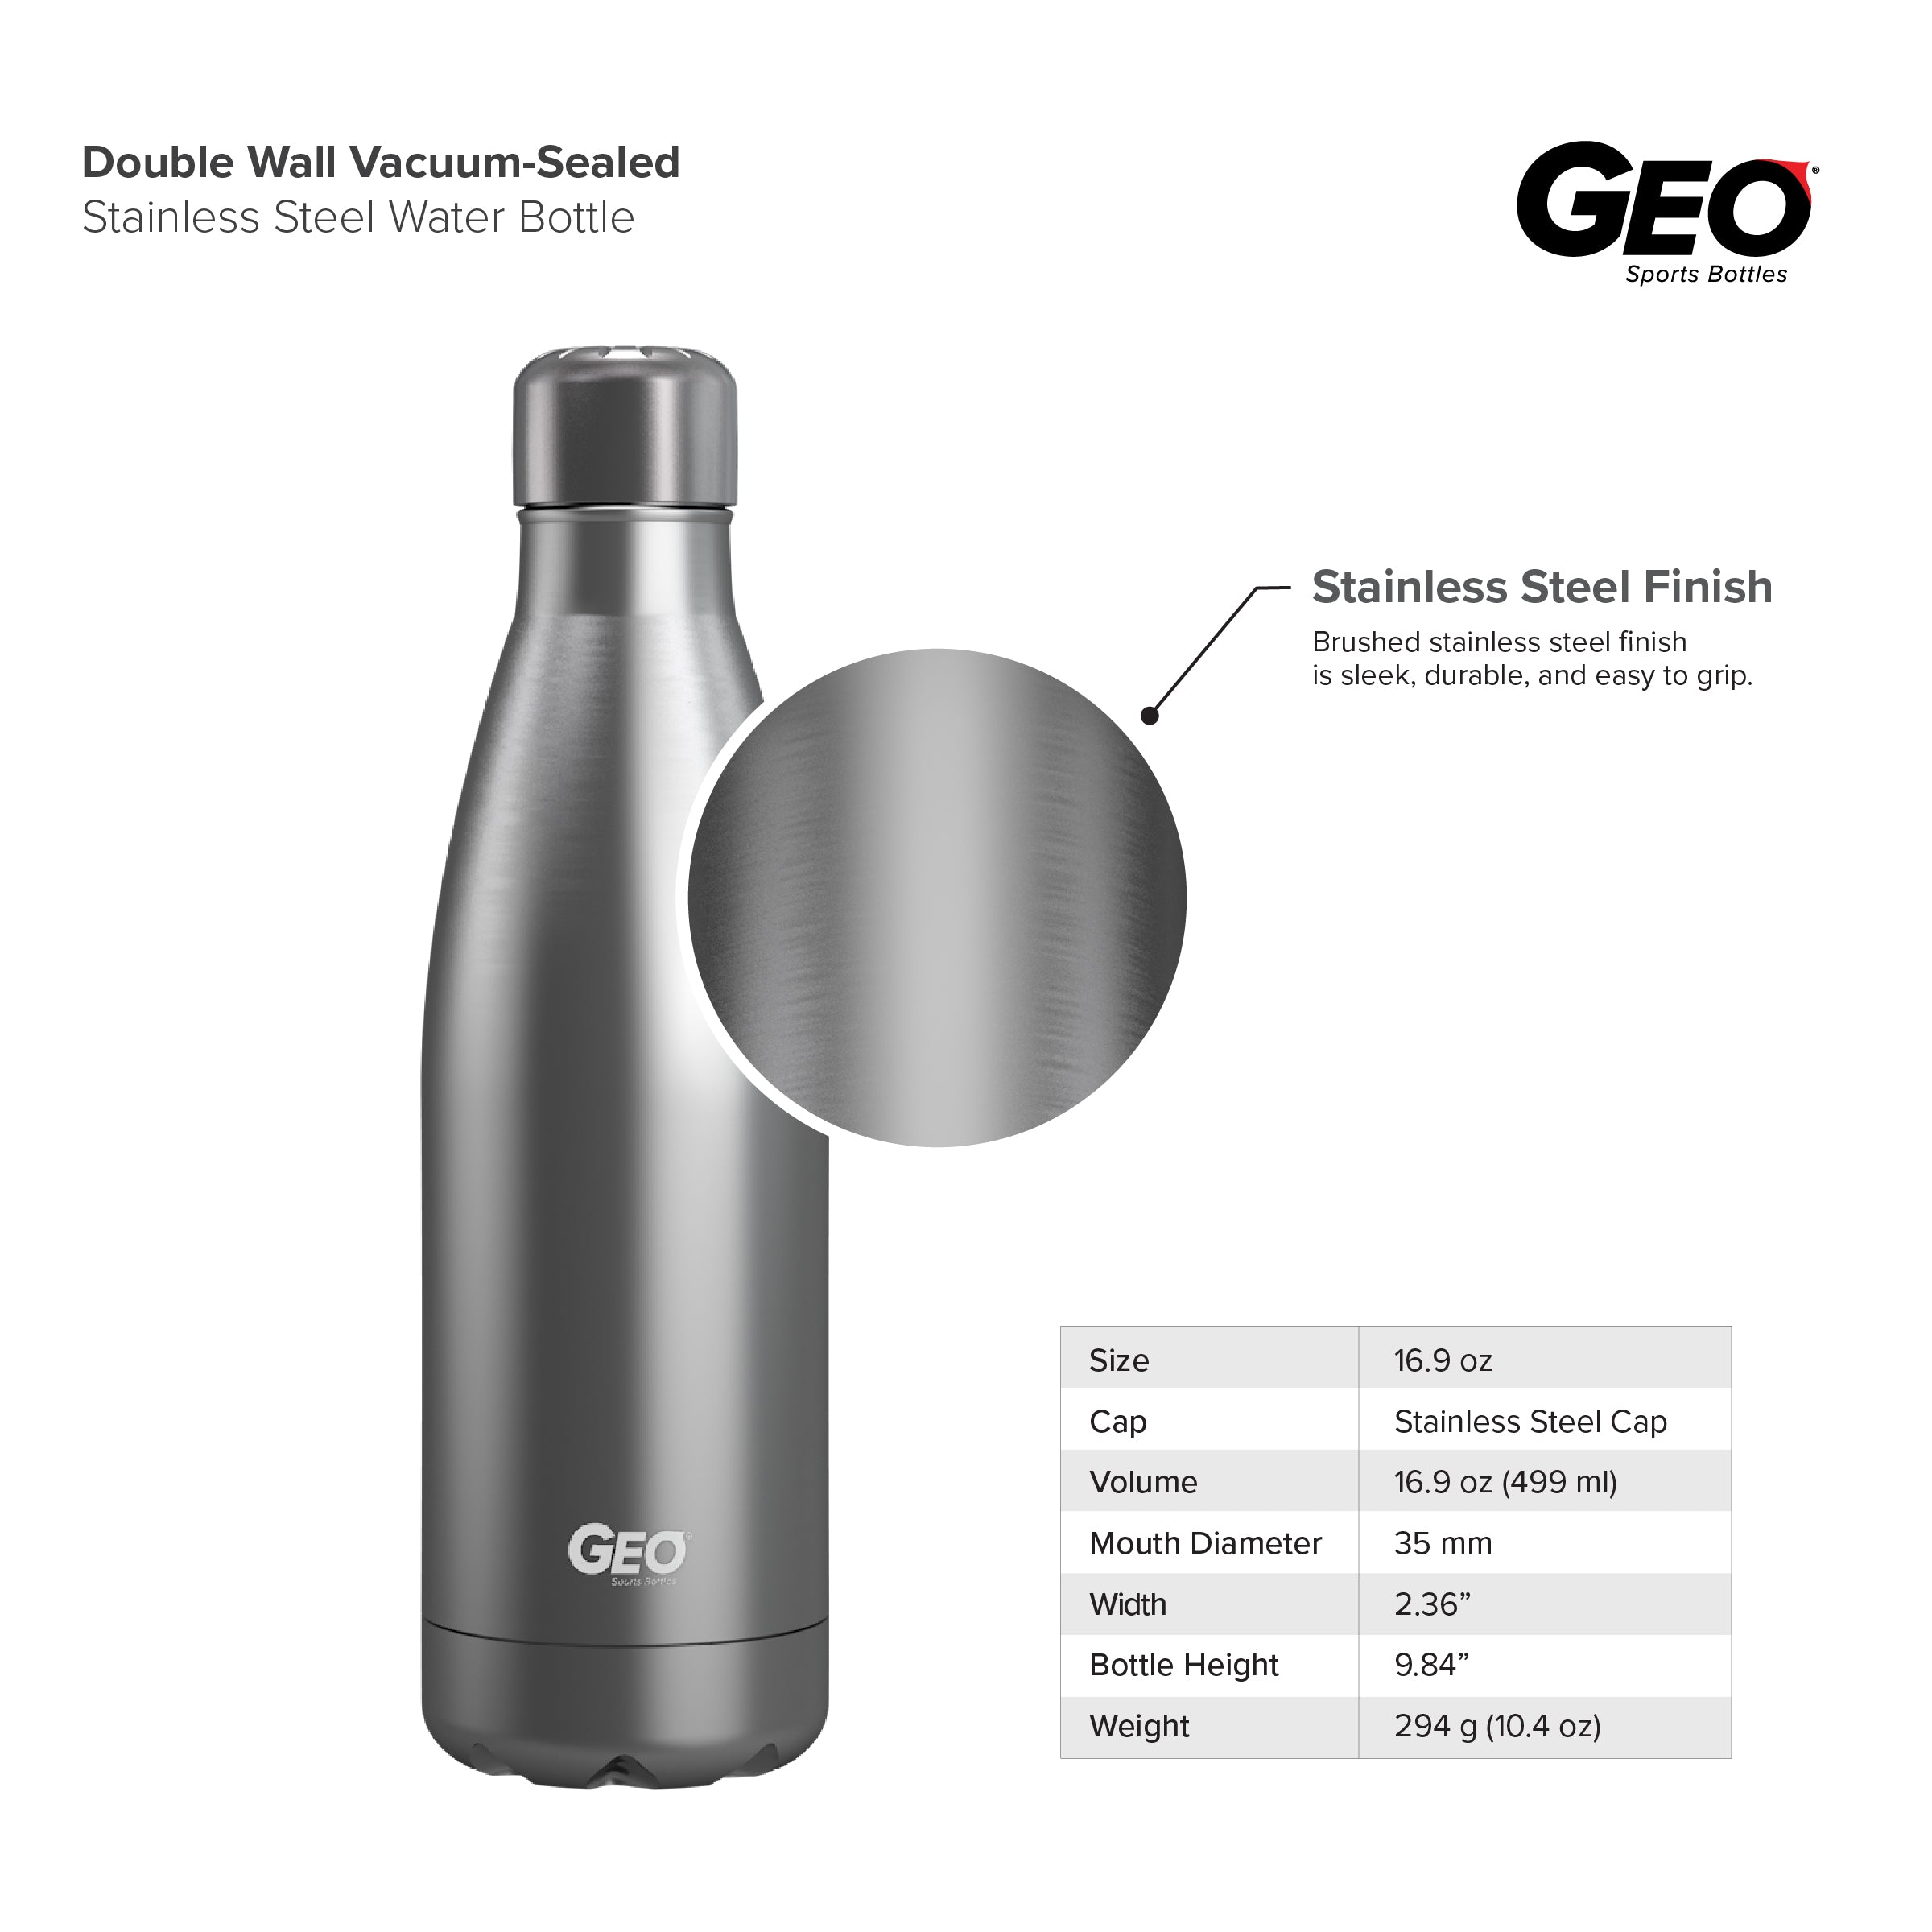 H2 Hydrology Water Bottle, Stainless Steel, Large Insulated Water Bottles,  Metal Water Bottles, Vacuum Sports Bottle, Double Wall Water Bottle with